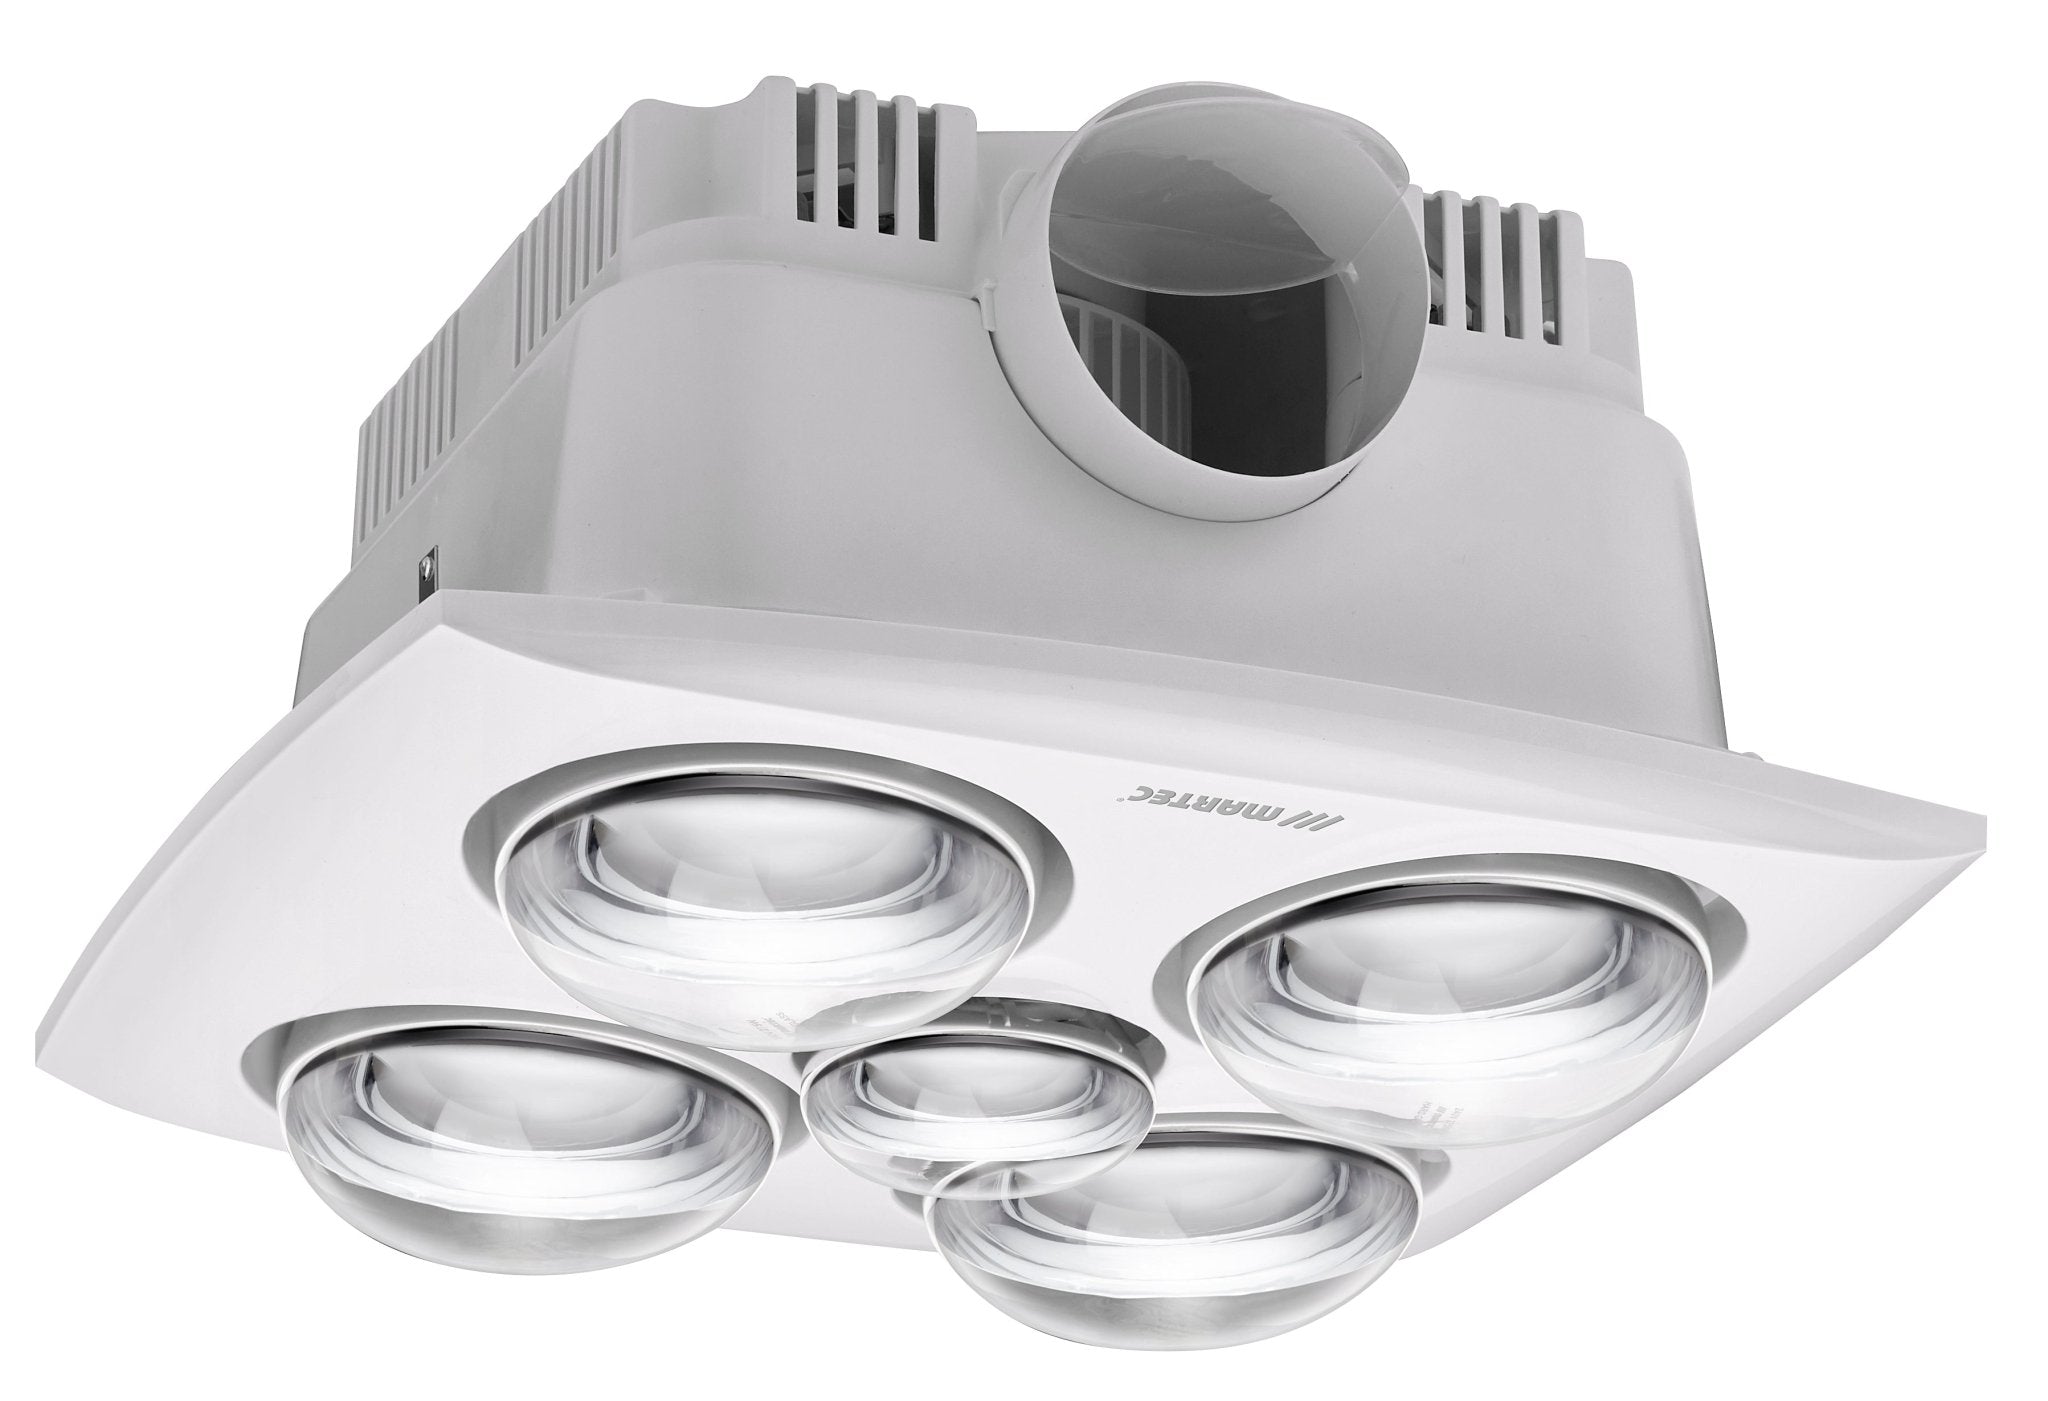 Martec Contour 2 Exhaust Fan 3-in-1 w/ 2x Heater & 1x LED Light in Silver or White - Mases LightingMartec